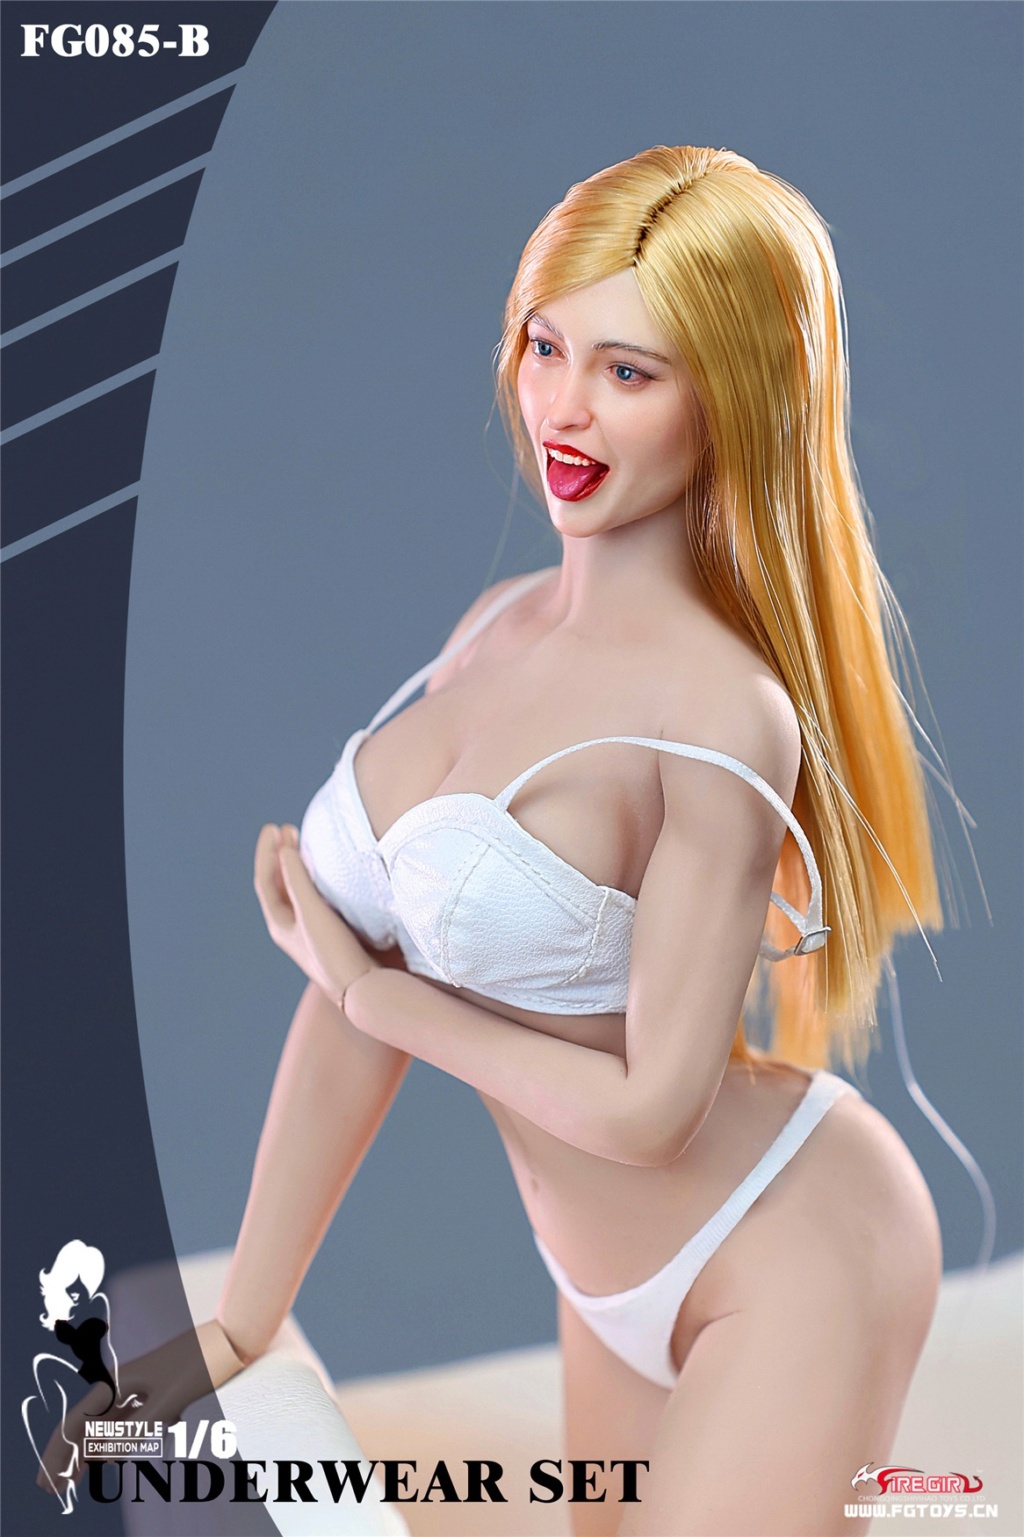 Female - NEW PRODUCT: Fire Girl Toys: 1/6 FG085 Wardrobe Collection Female Underwear Set (Three Colors) NSFW 0cc1c510